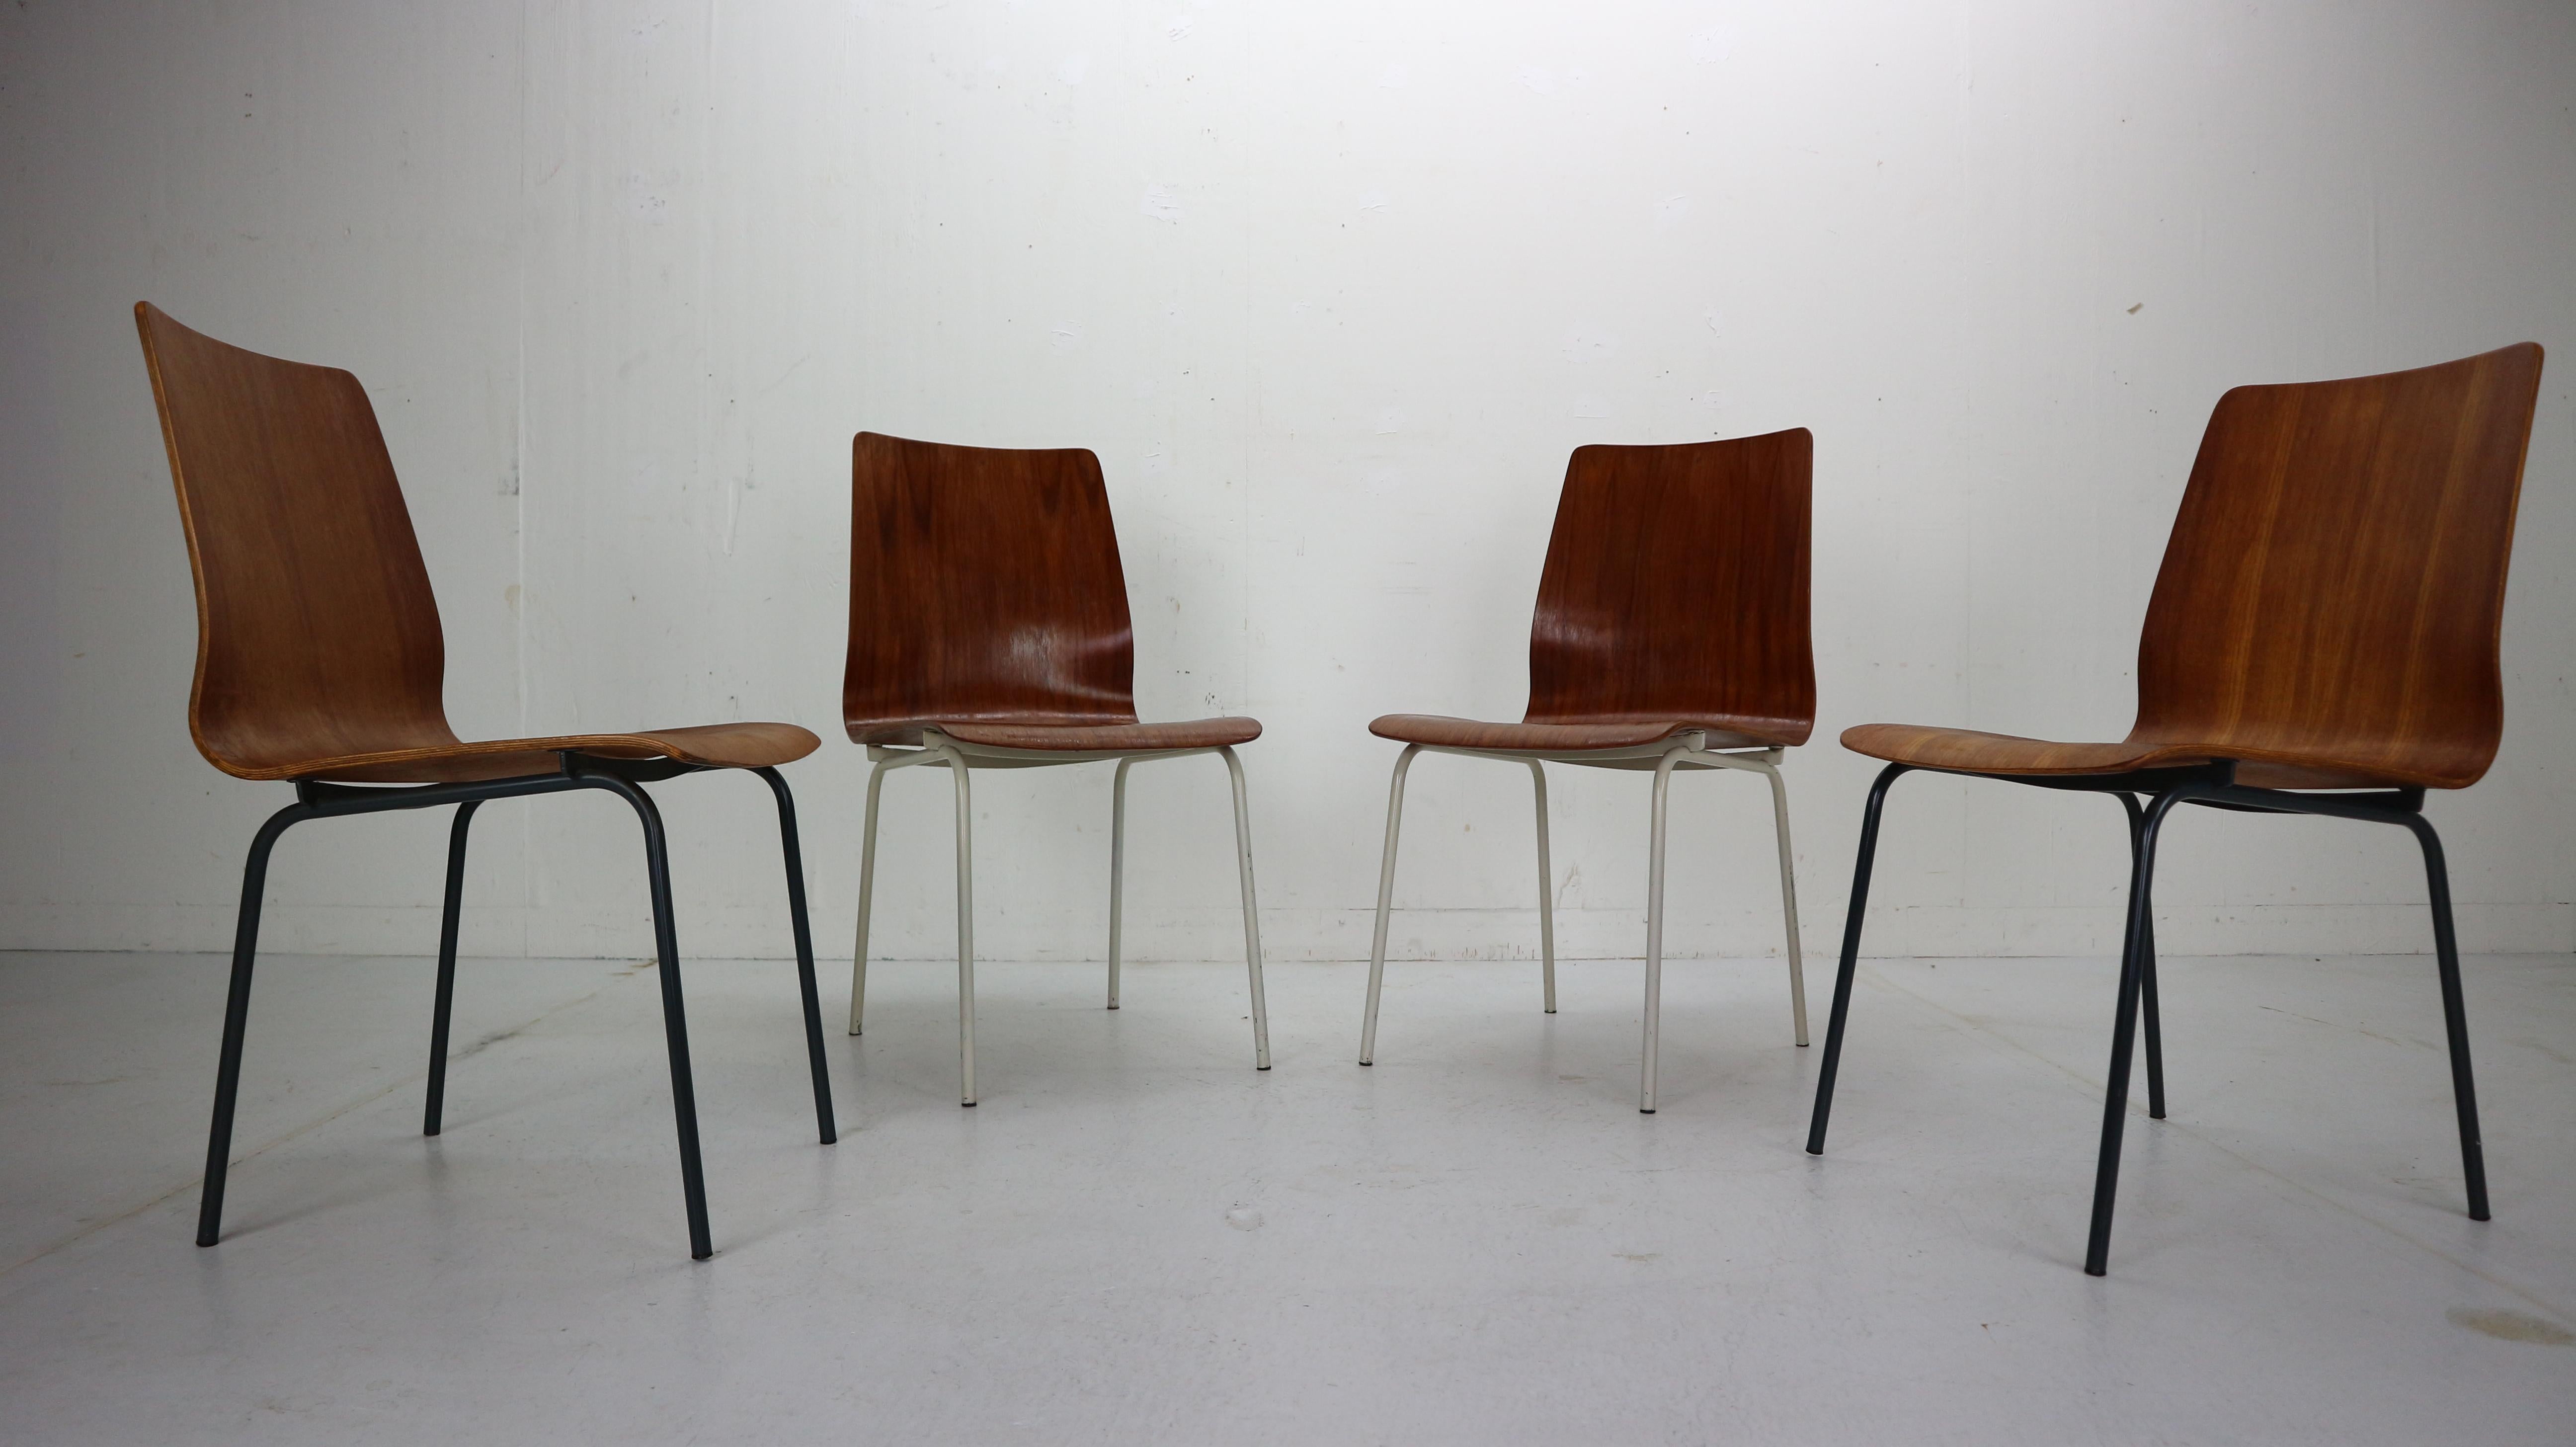 Set of 4 dinning room chairs designed by Fristo Kramer for Auping manufacture in 1950s period, The Netherlands. These chairs are part of the Euroika series, it features a bent teak plywood seat with an enameled metal frame.
Two chairs has color